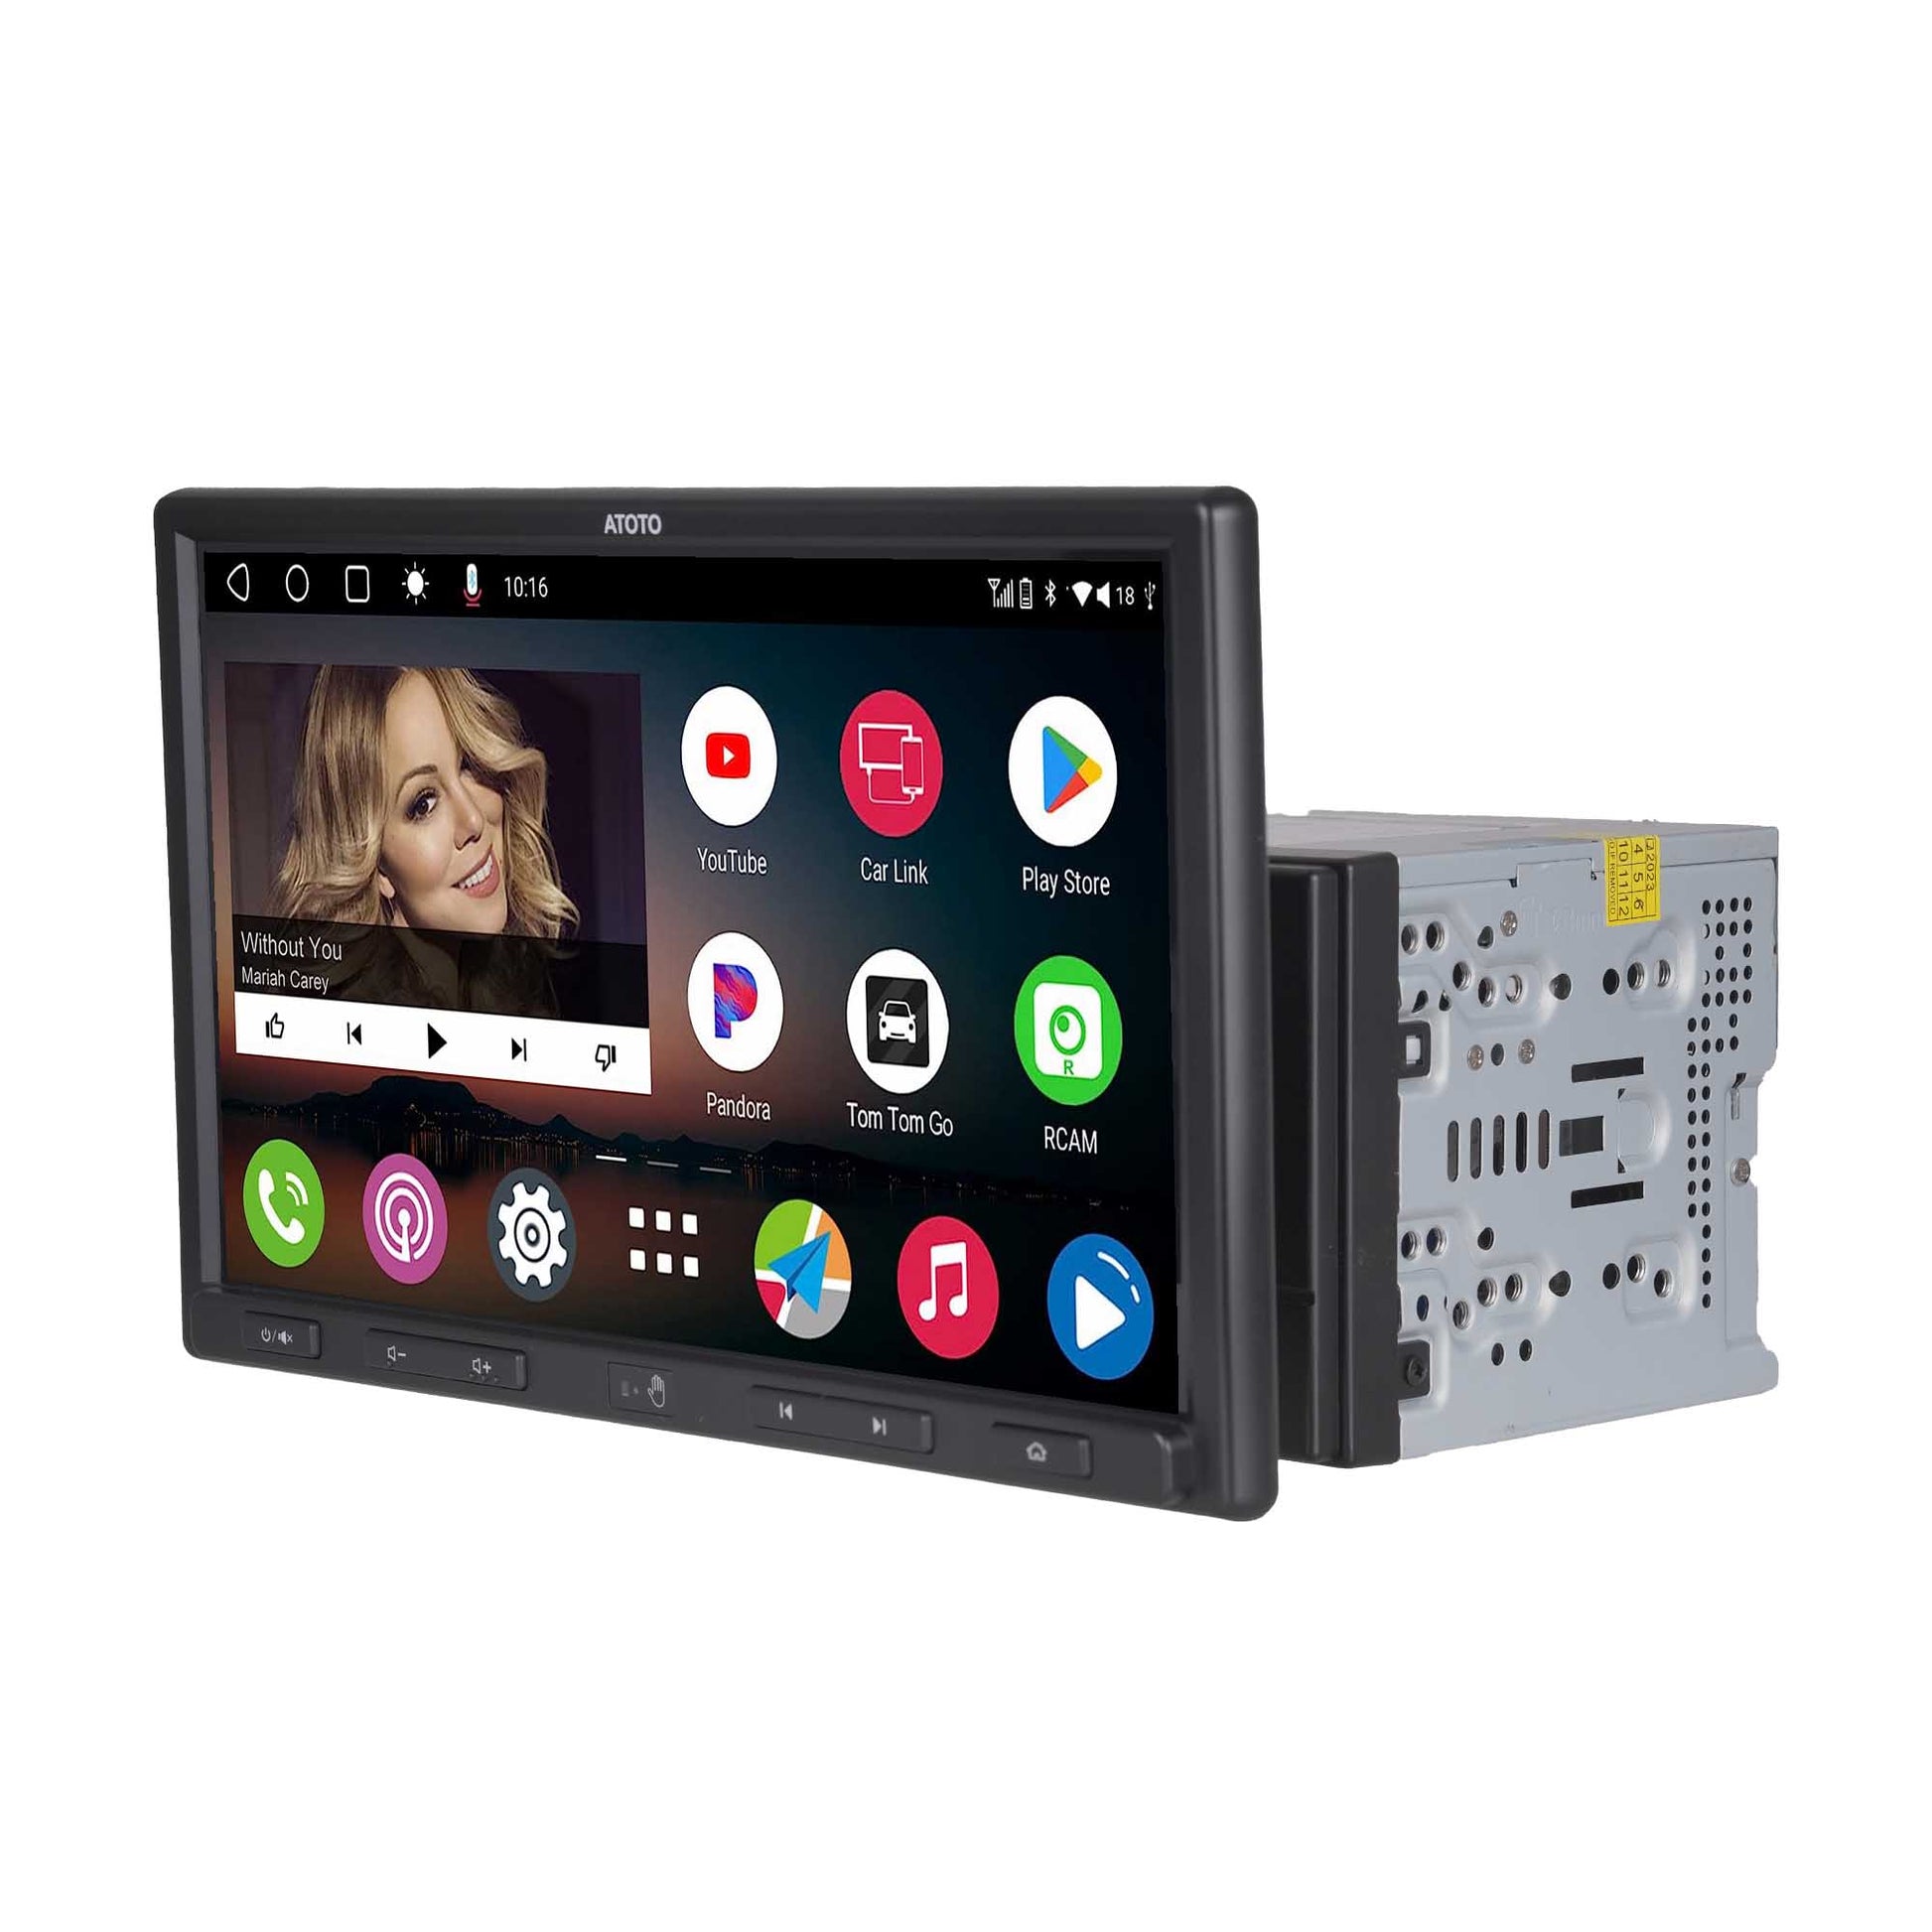 ATOTO S8 Ultra Plus[10.1inch QLED Display] in-Dash Video Receiver, Wireless Carplay & Android Auto,Dual Bluetooth w/aptX HD, VSV&LRV,Built-in 4G Cellular Modem,Gesture Operation,6GB+128GB,S8G2109UP